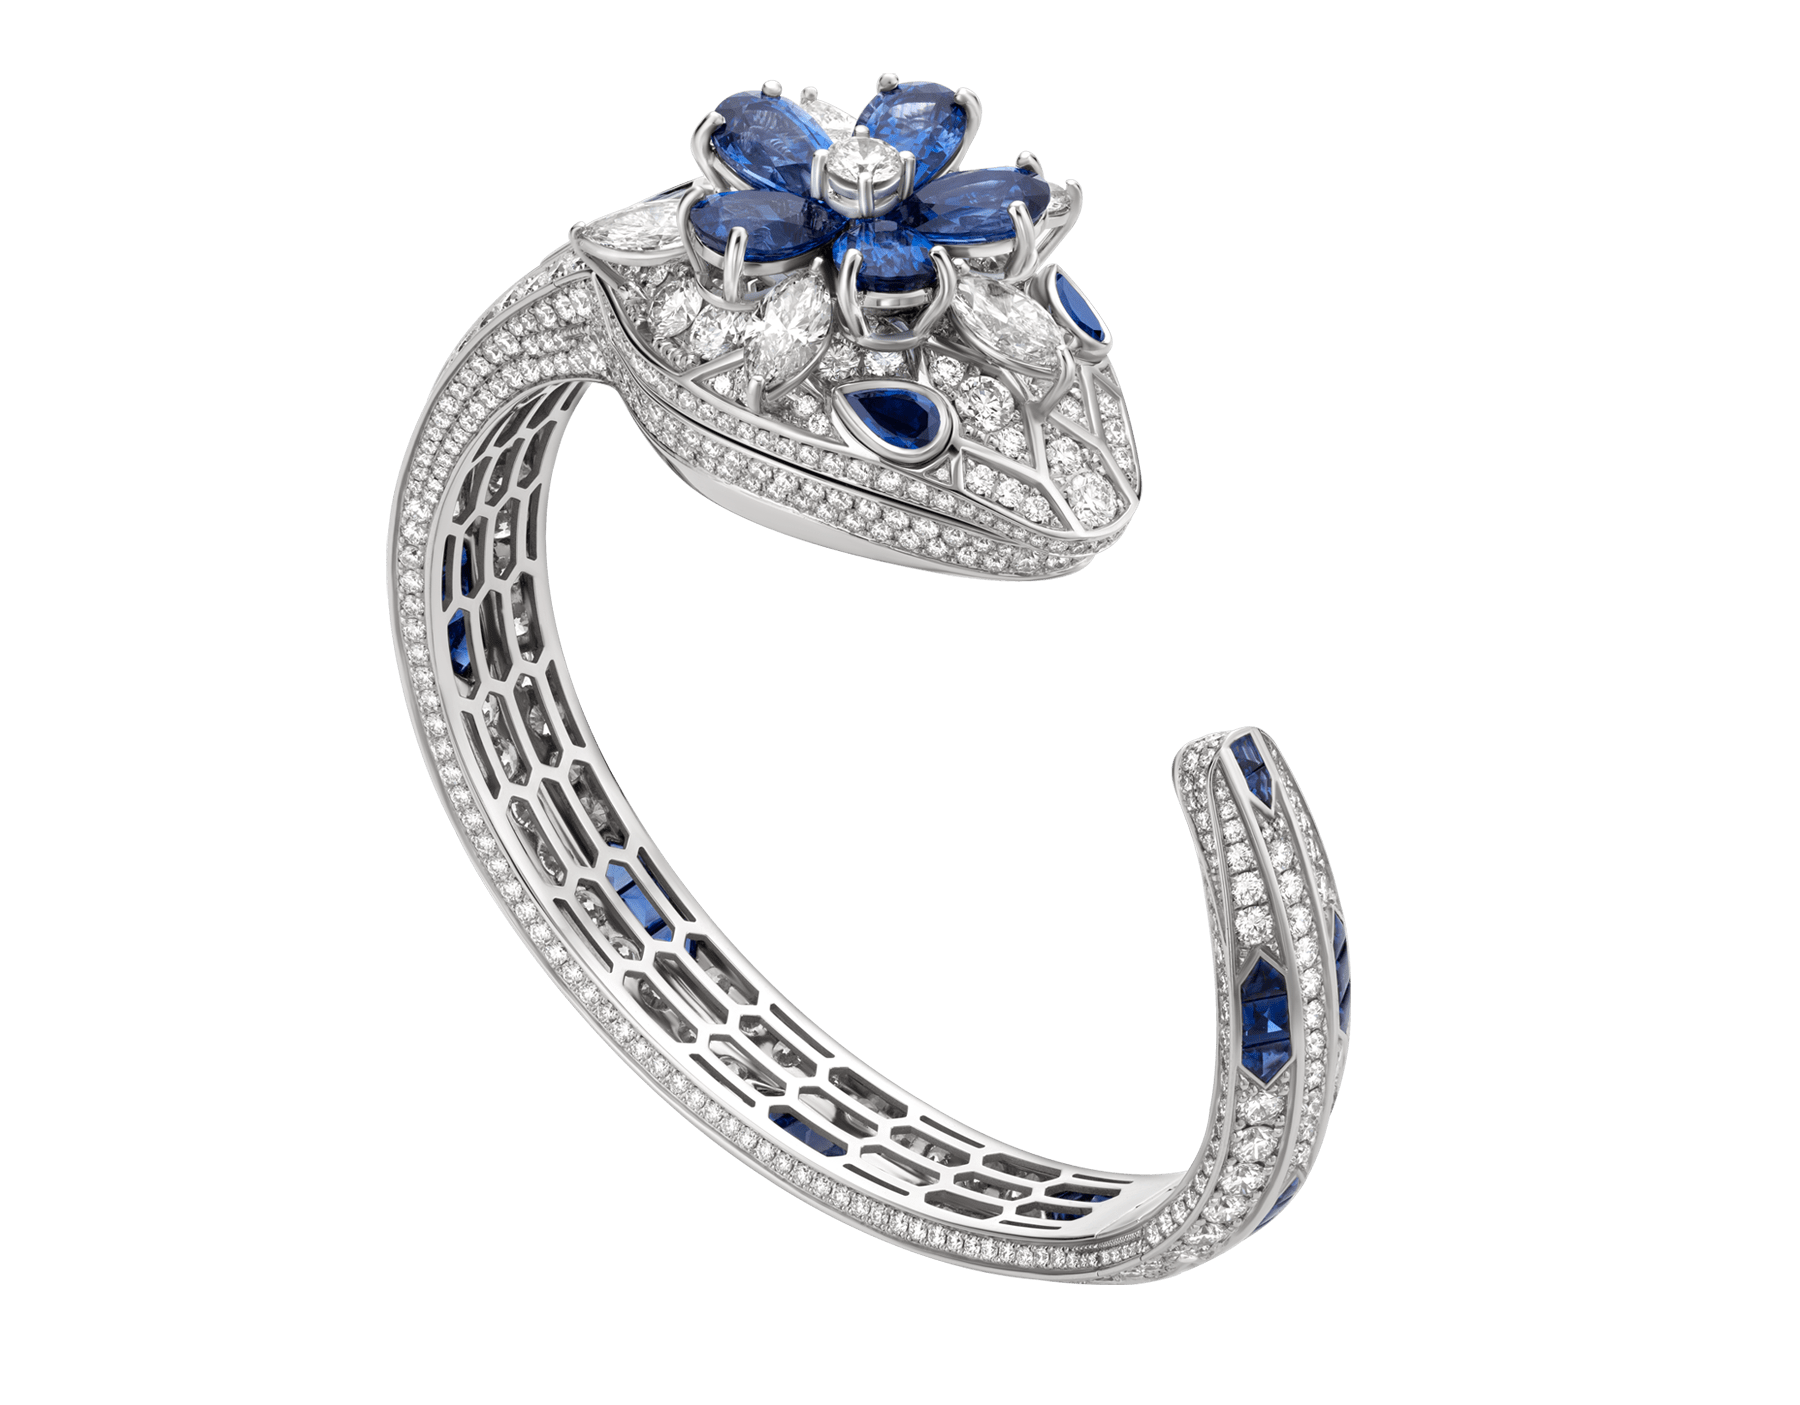 Serpenti Secret Watch with 18 kt white gold head set with brilliant-cut and marquise-shaped diamonds and pear-shaped sapphires and sapphire eyes, 18 kt white gold case and dial both set with brilliant-cut diamonds, and 18 kt white gold bracelet set with brilliant-cut diamonds and buff-top cut sapphires 103020 image 1